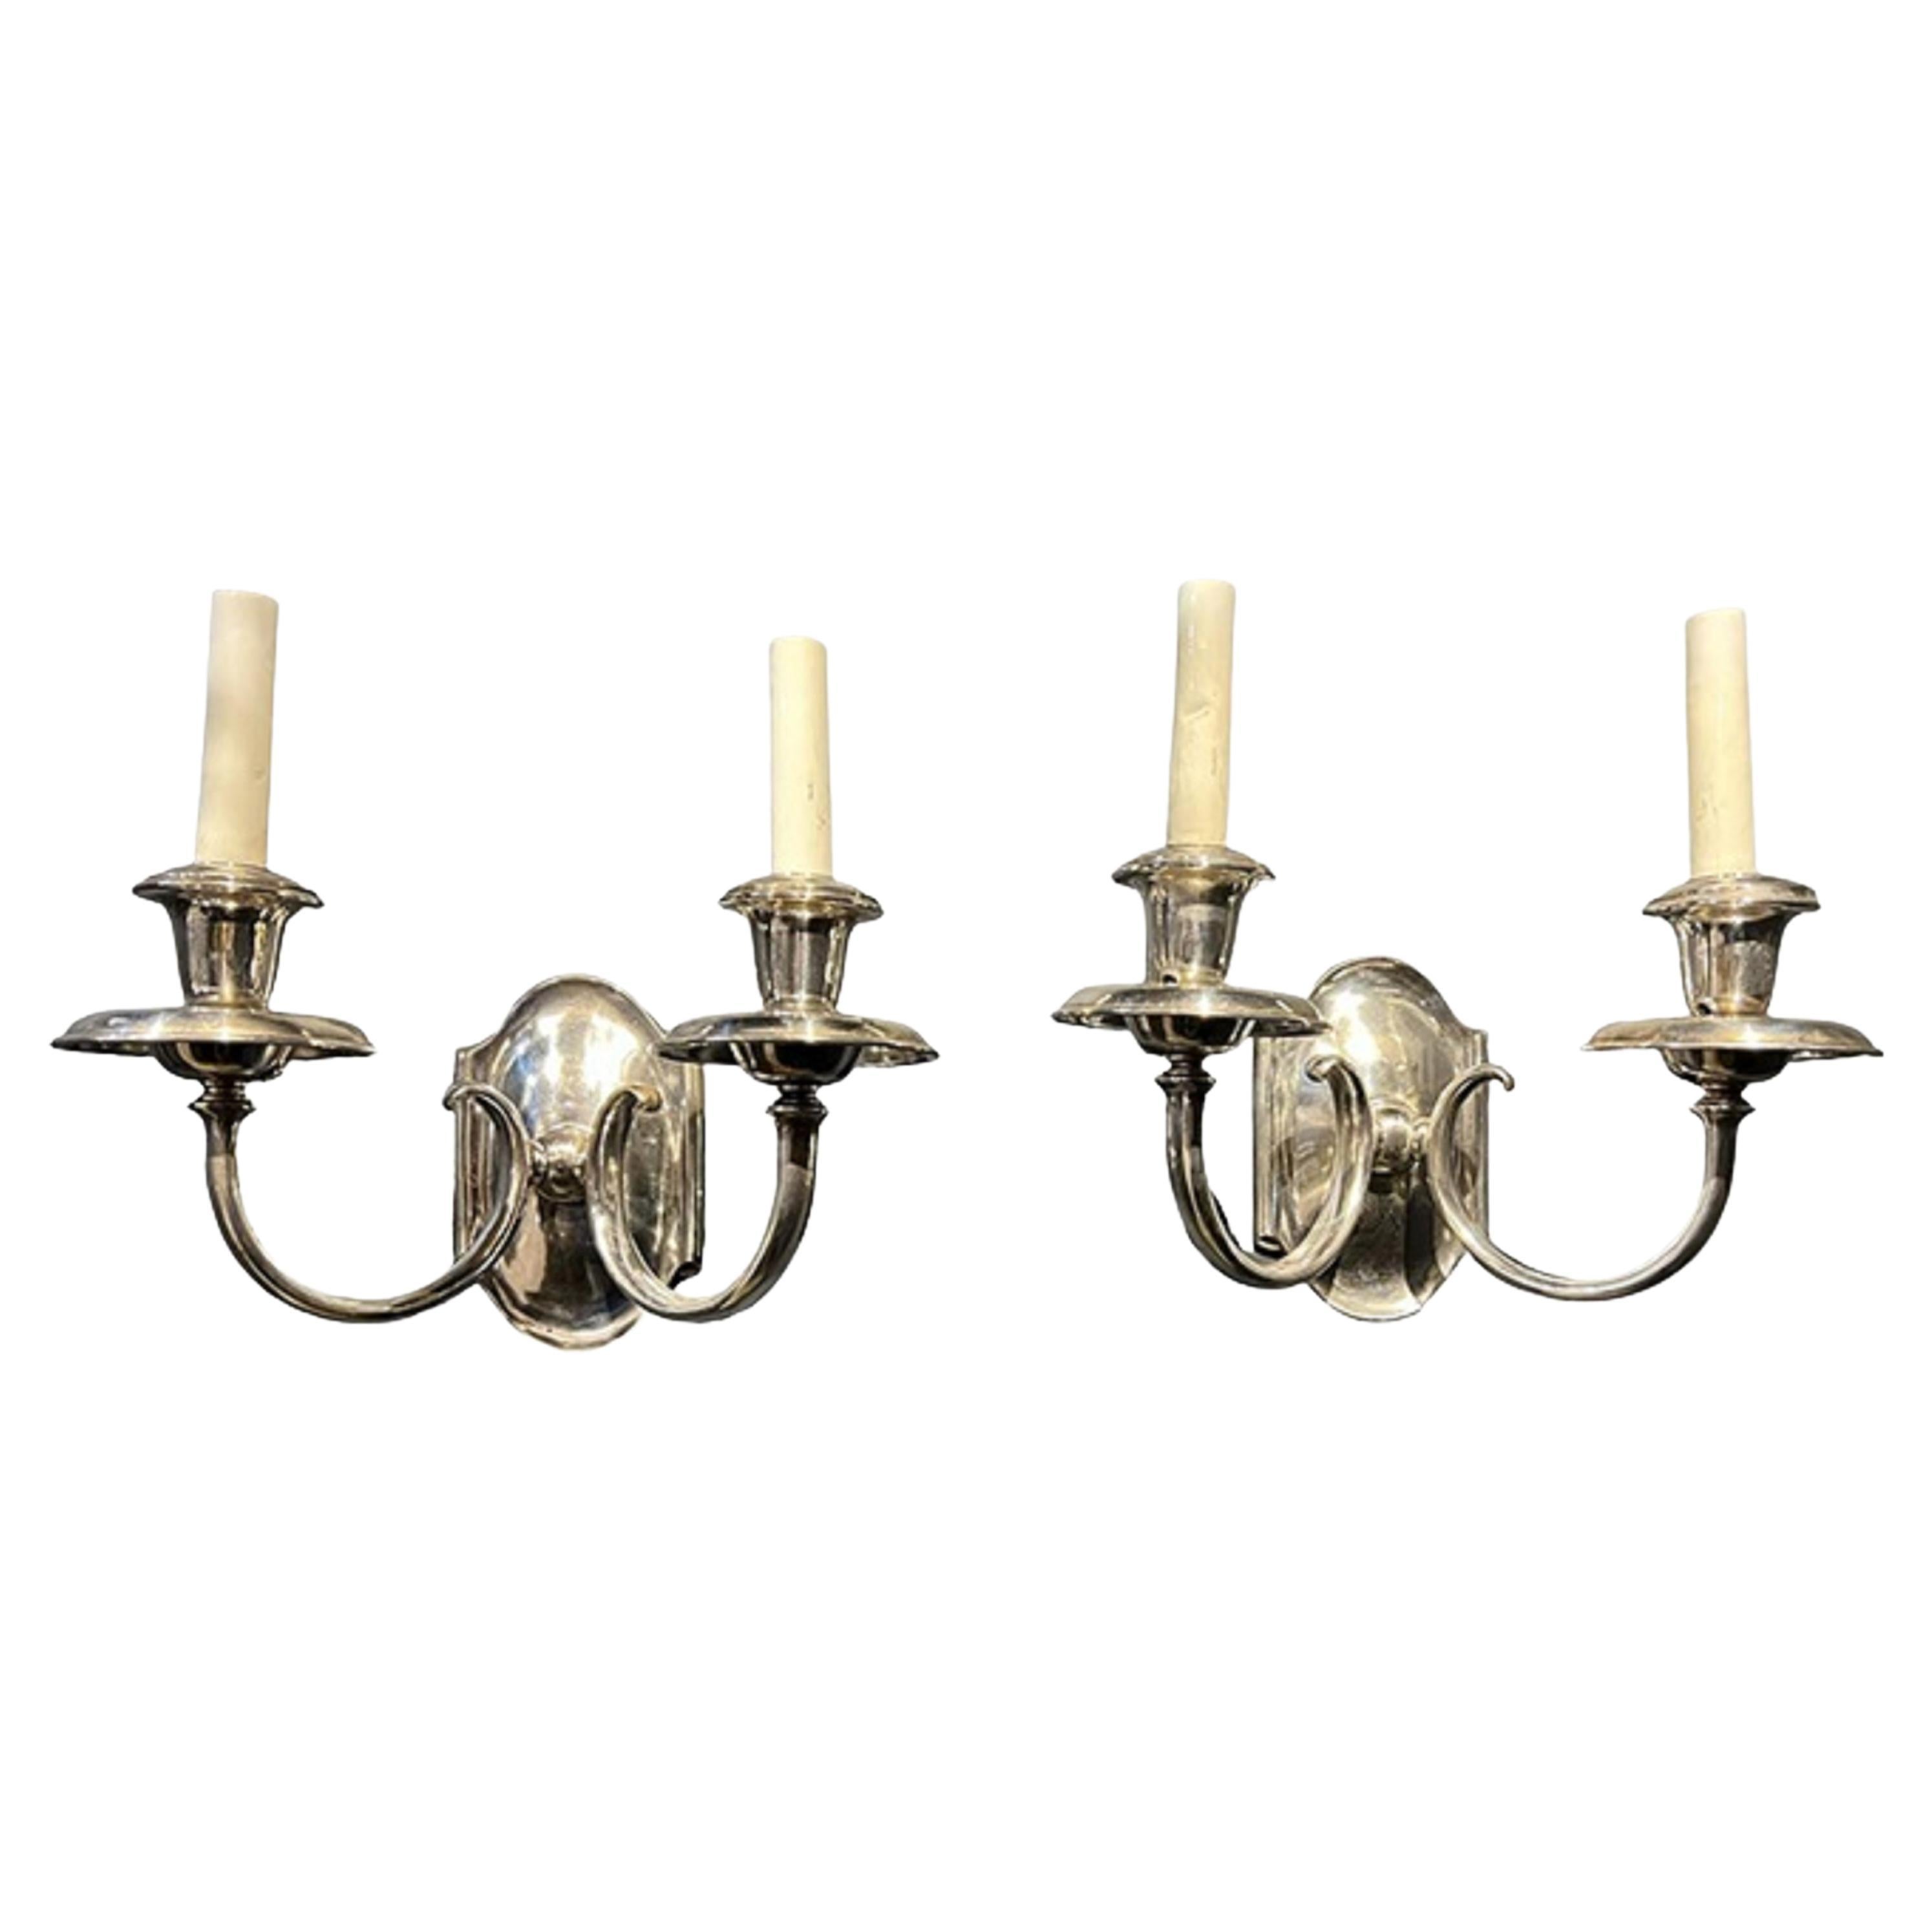 1920s, Silver Plated Caldwell Sconces